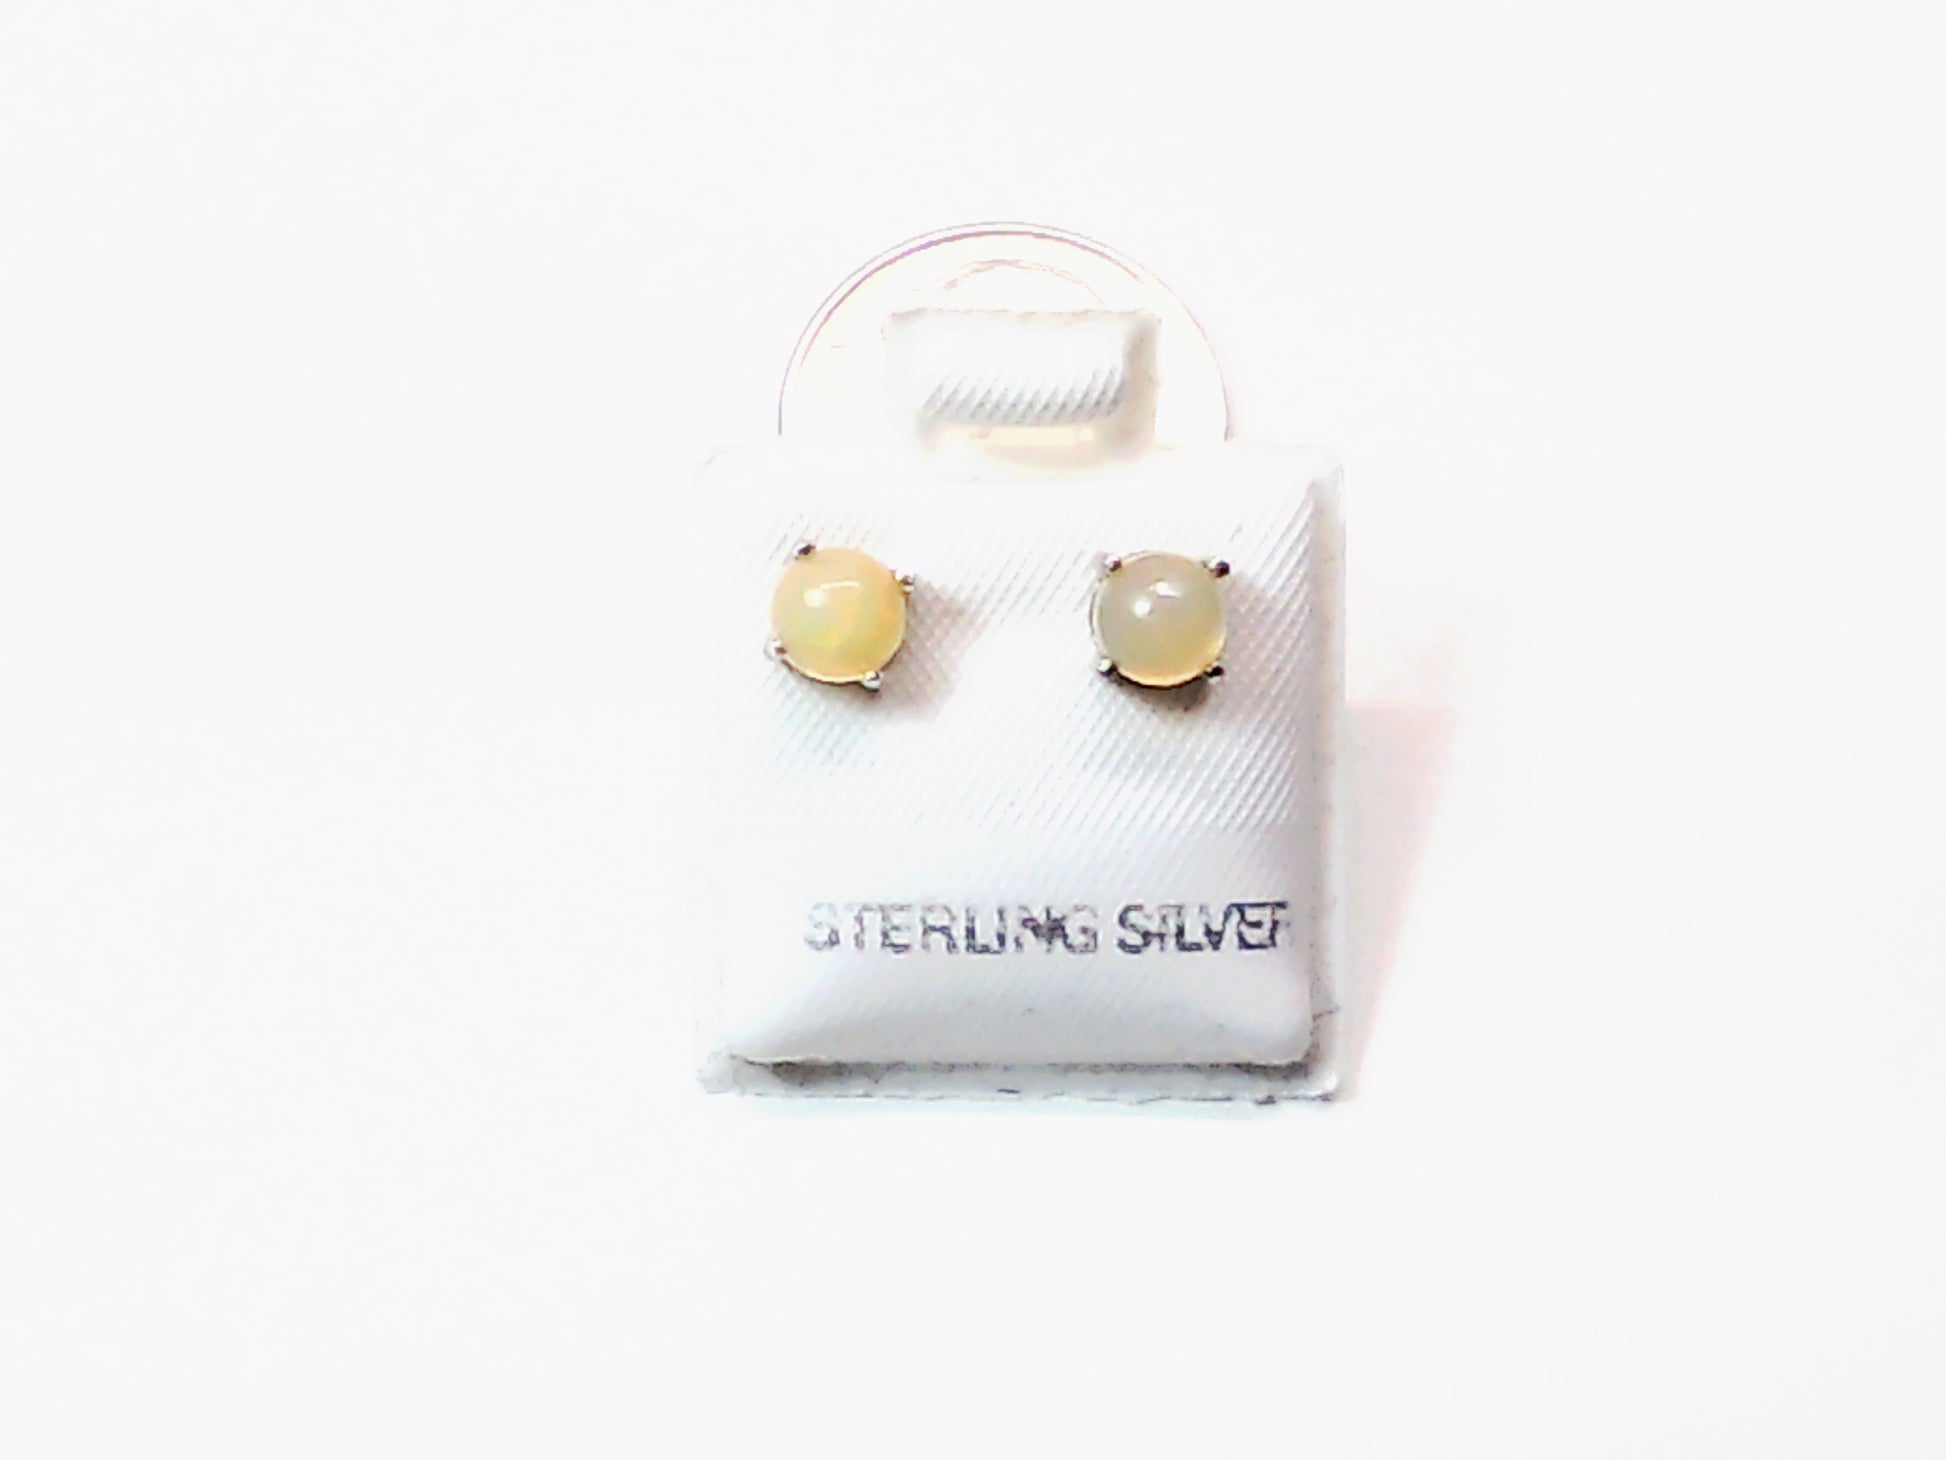 Genuine stone birthstone earrings in .925 sterling silver - Providence silver gold jewelry usa